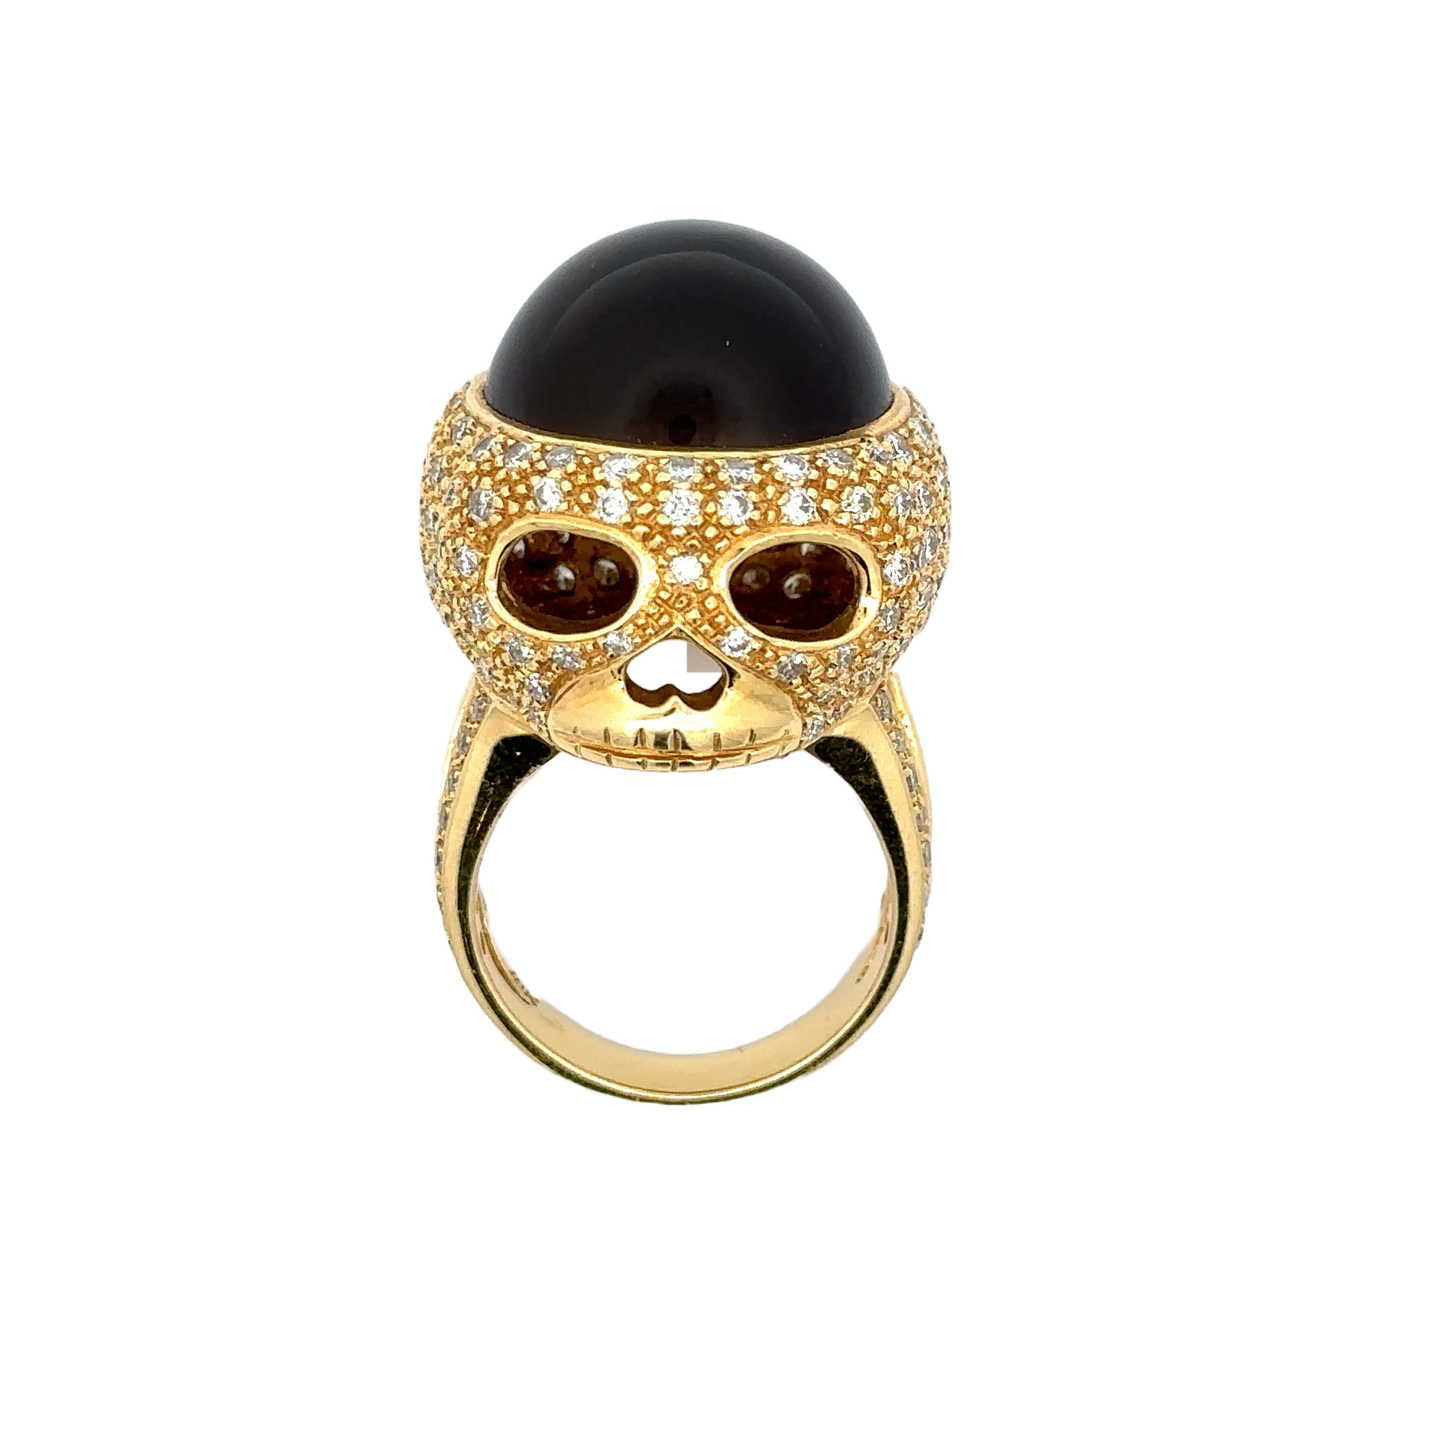 18K yellow gold cat's eye diamond skull ring. Shows the skull face of the ring. Some scratches on the band.